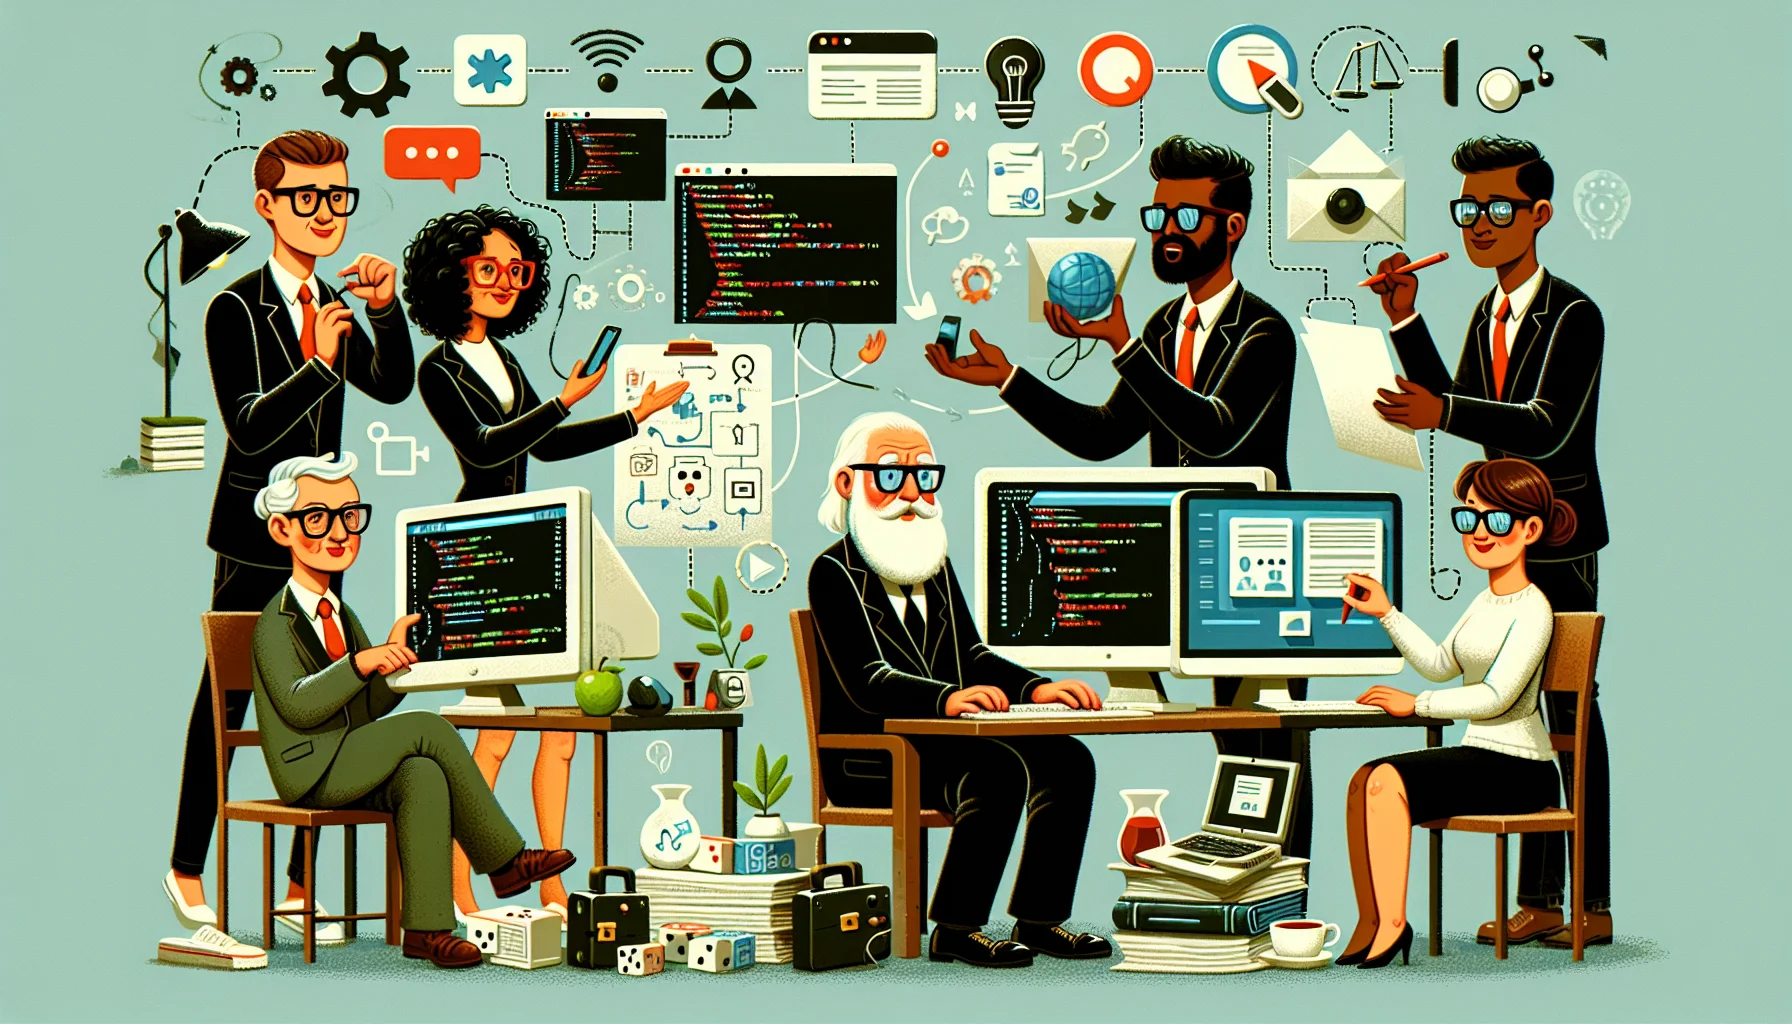 Create a humorous and engaging scenario illustrating the process of creating a website without using a website builder. More specifically, the image should show several unique characters each performing different tasks integral to the process. A Caucasian man with glasses is seen coding on a vintage computer, a black woman with a business suit is negotiating contracts for web hosting services, a Middle-Eastern man with a detailed plan represents the website's design and a South Asian woman is testing the website for bugs. Objects and symbols that represent coding, web hosting, and design are scattered around.